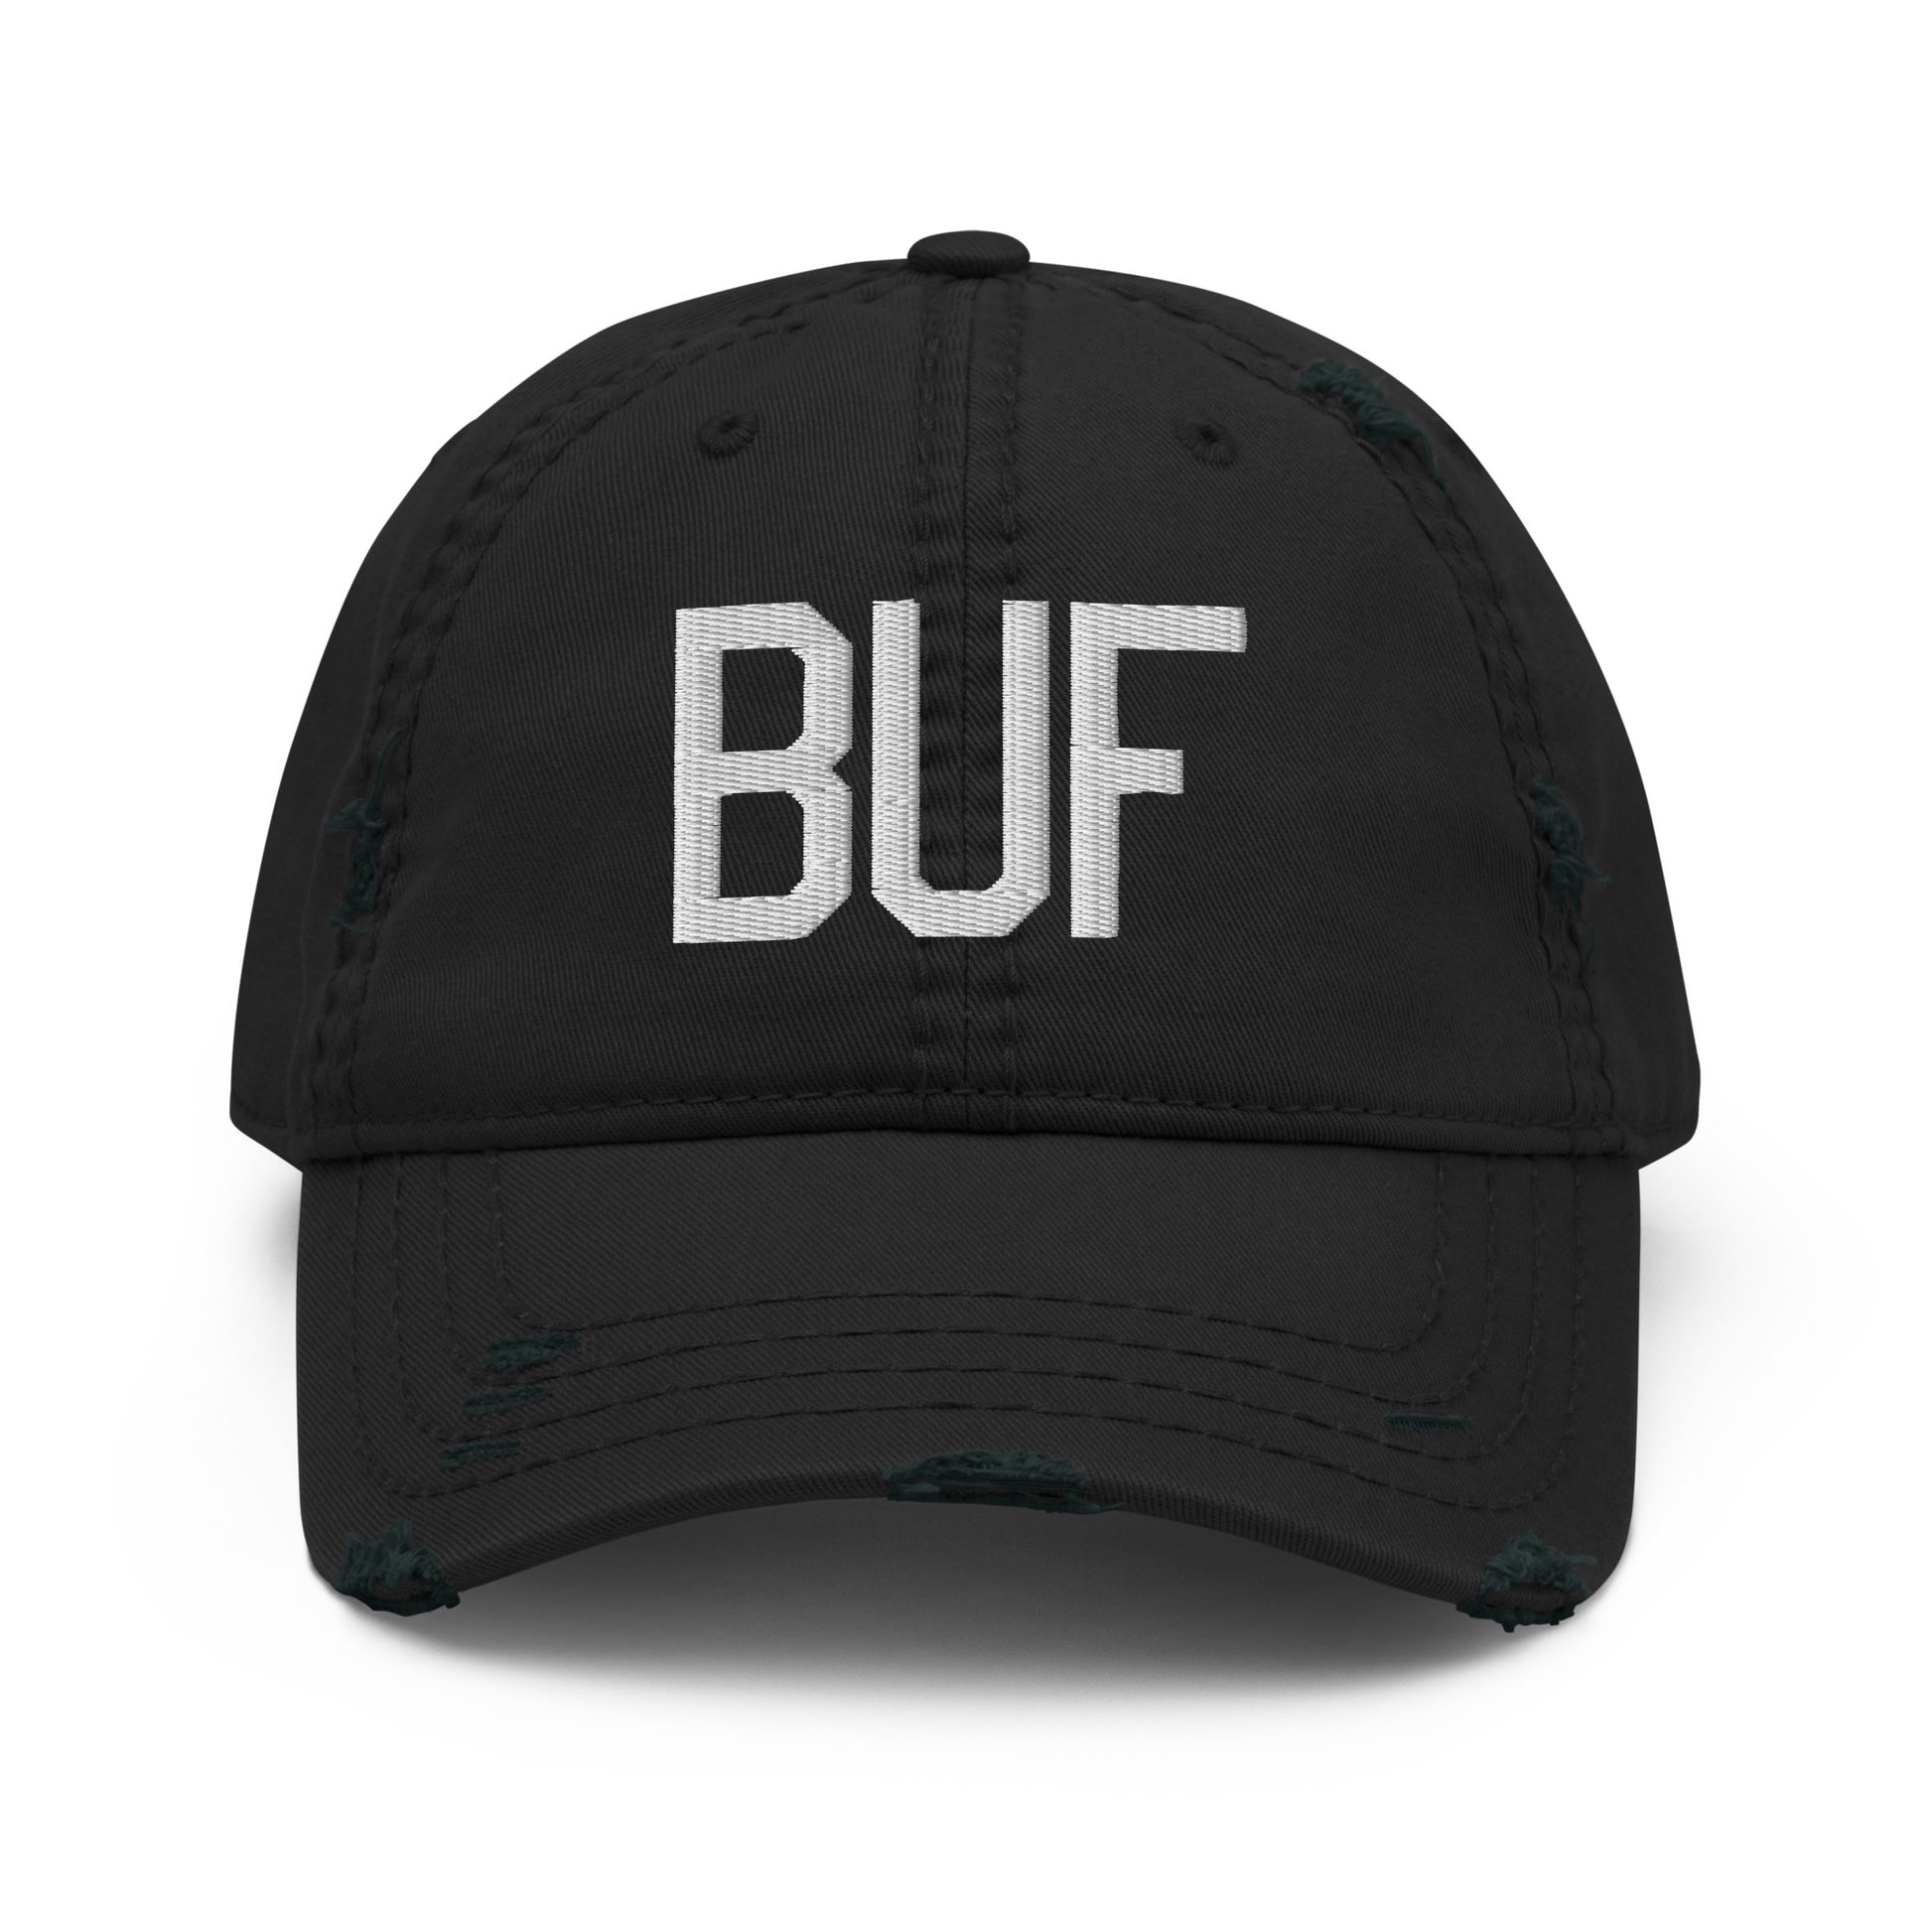 Airport Code Distressed Hat - White • BUF Buffalo • YHM Designs - Image 10